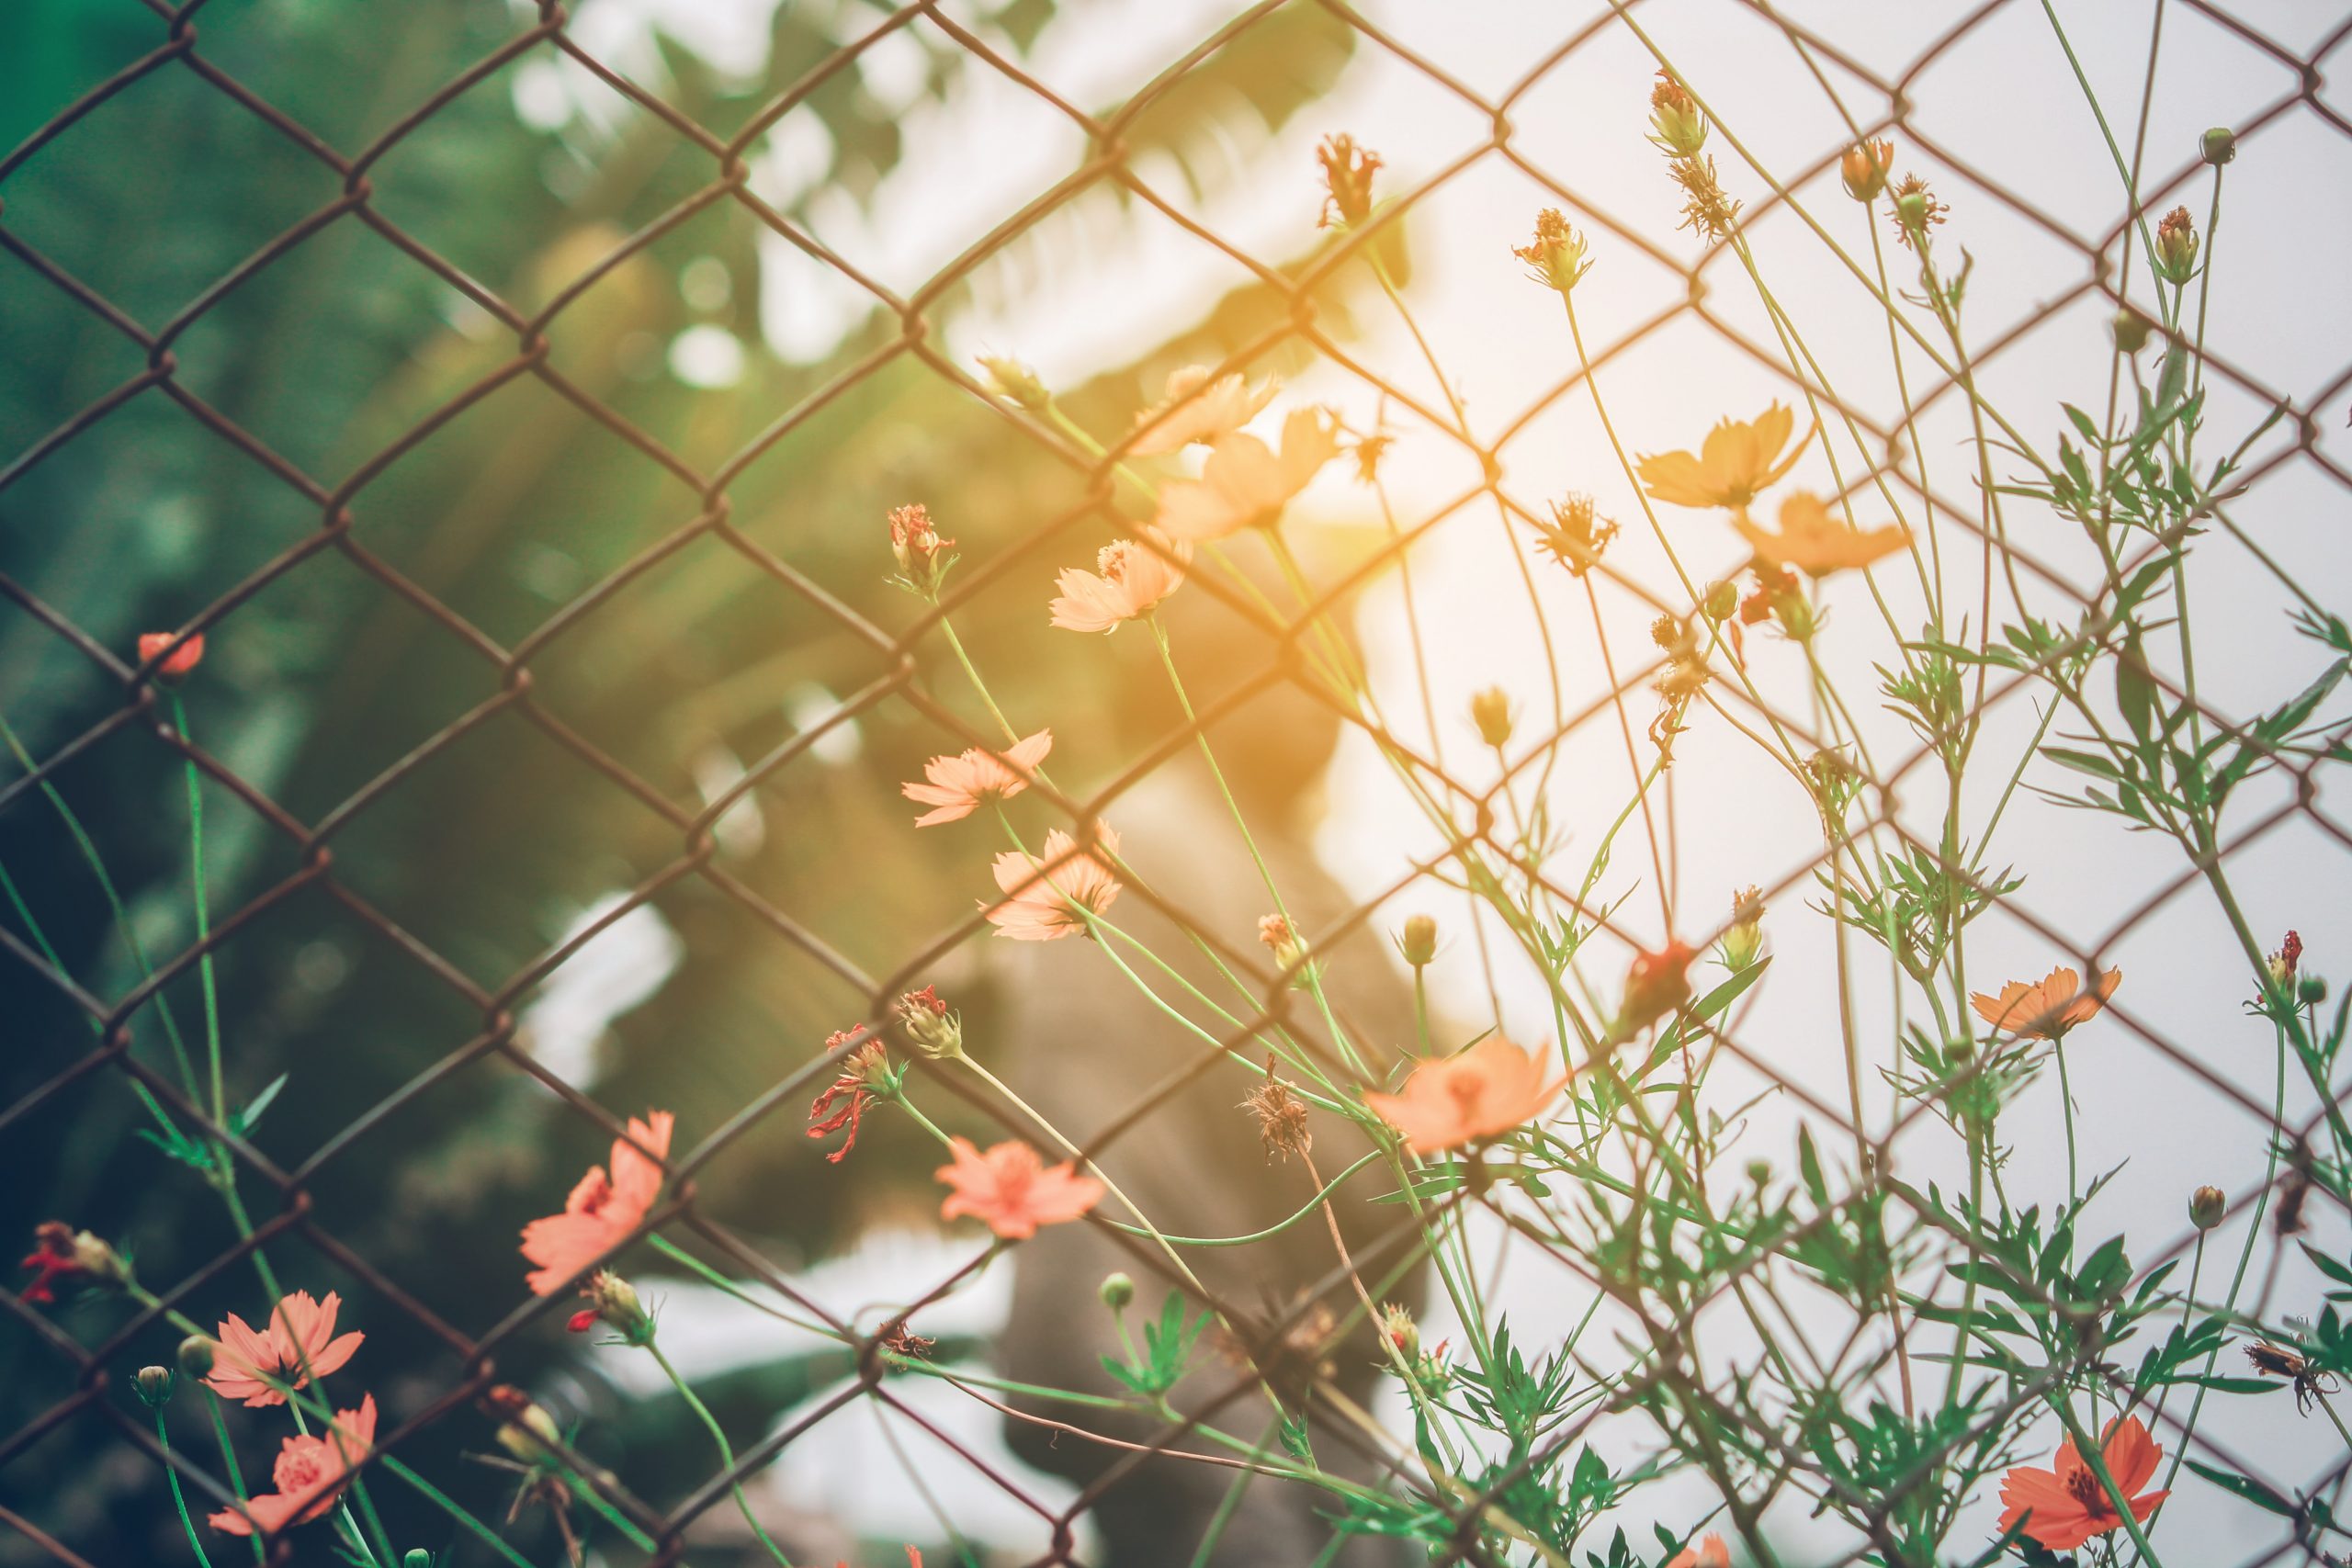 flowers on fence in sun